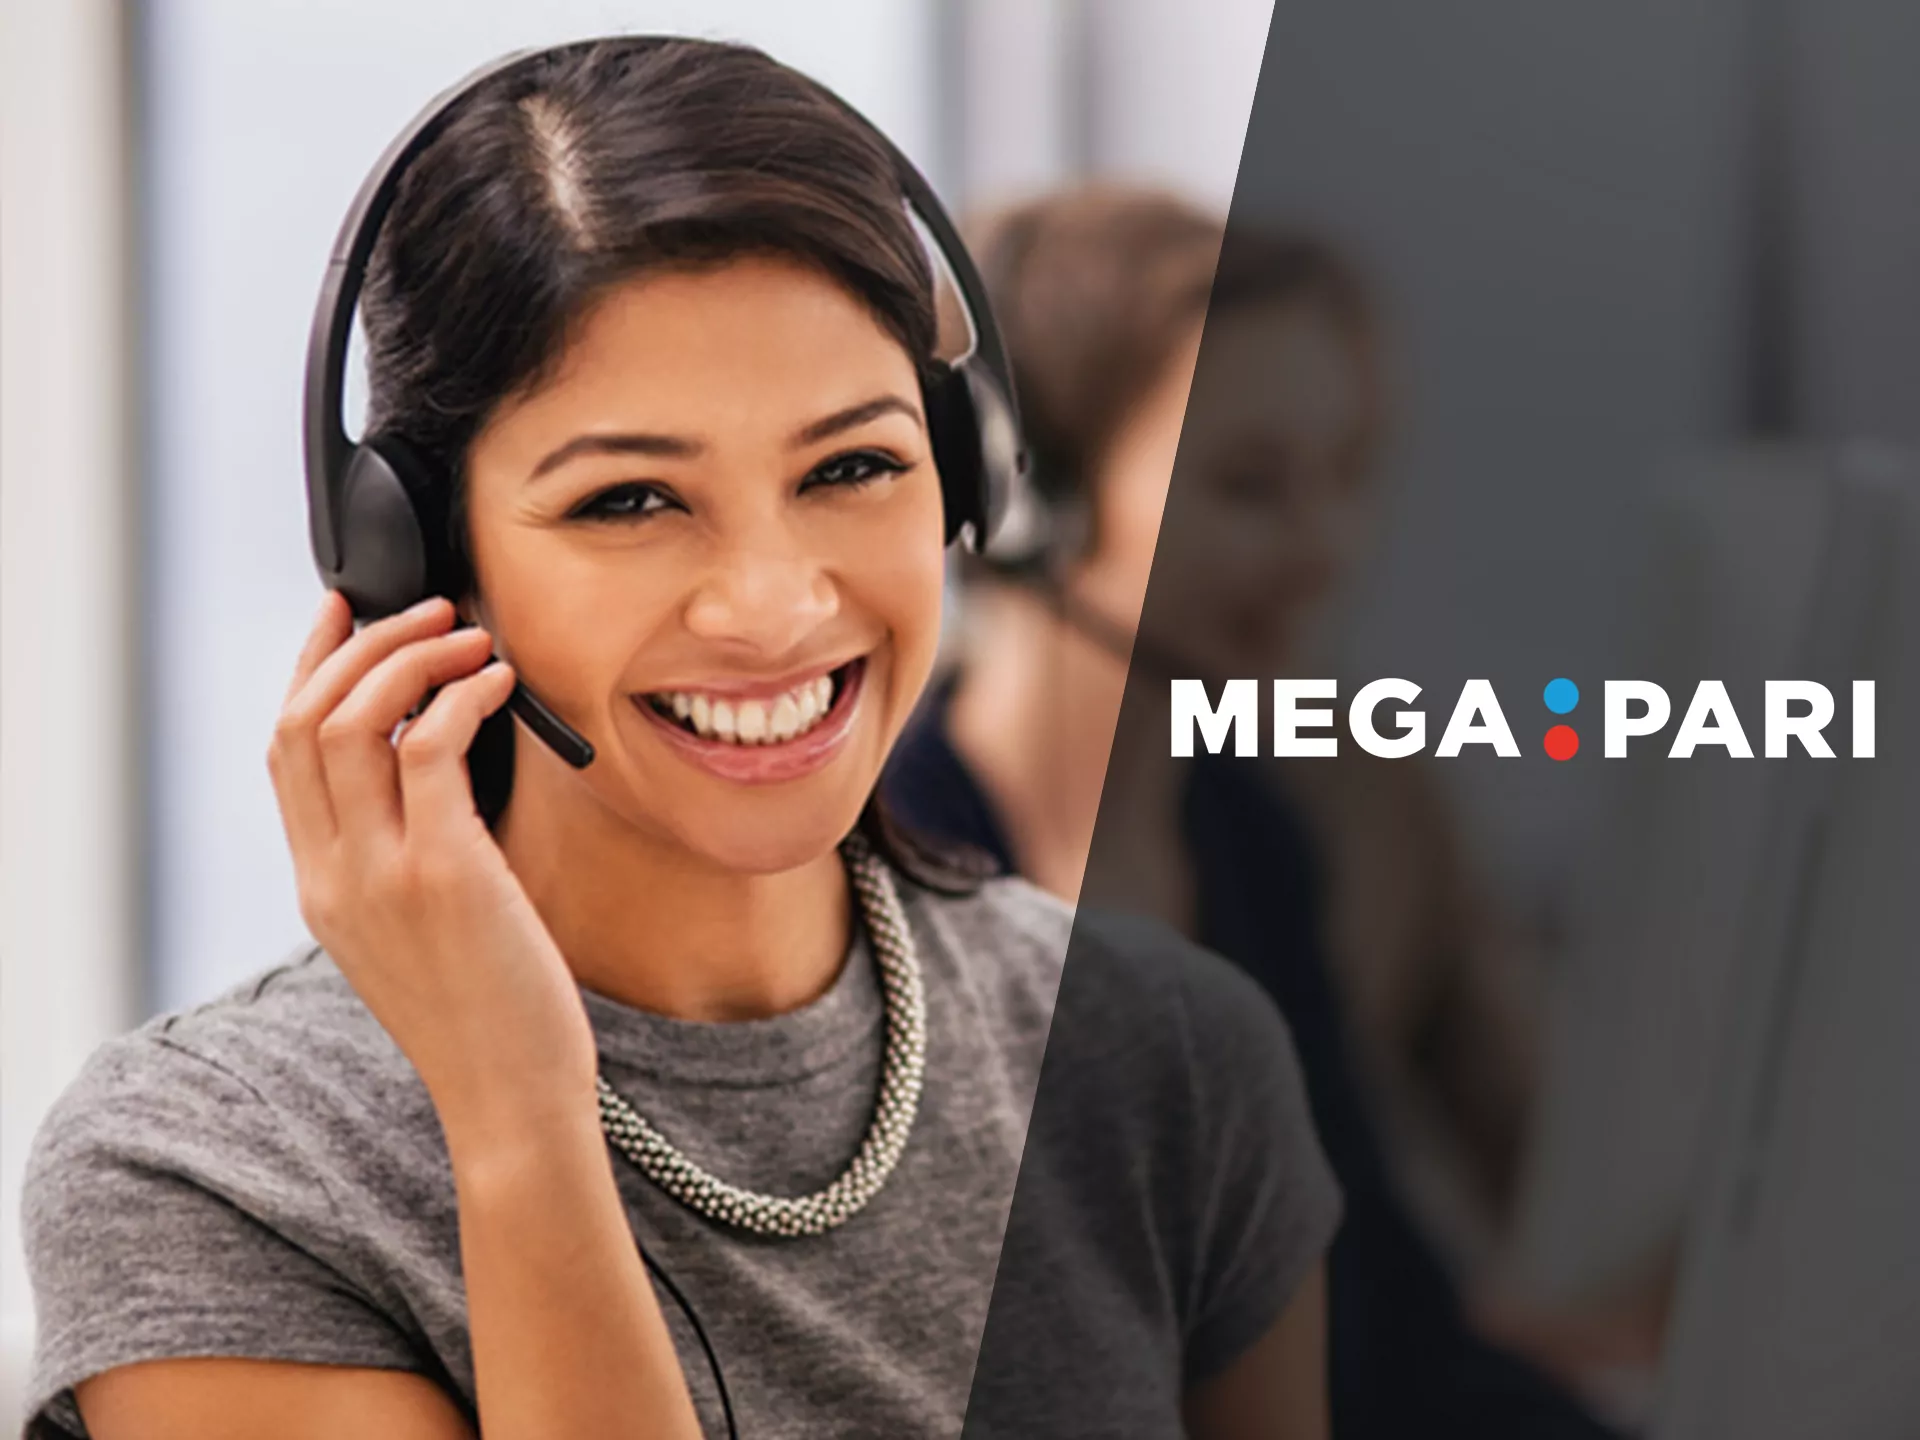 The customer support team is available via Megapari mobile app.